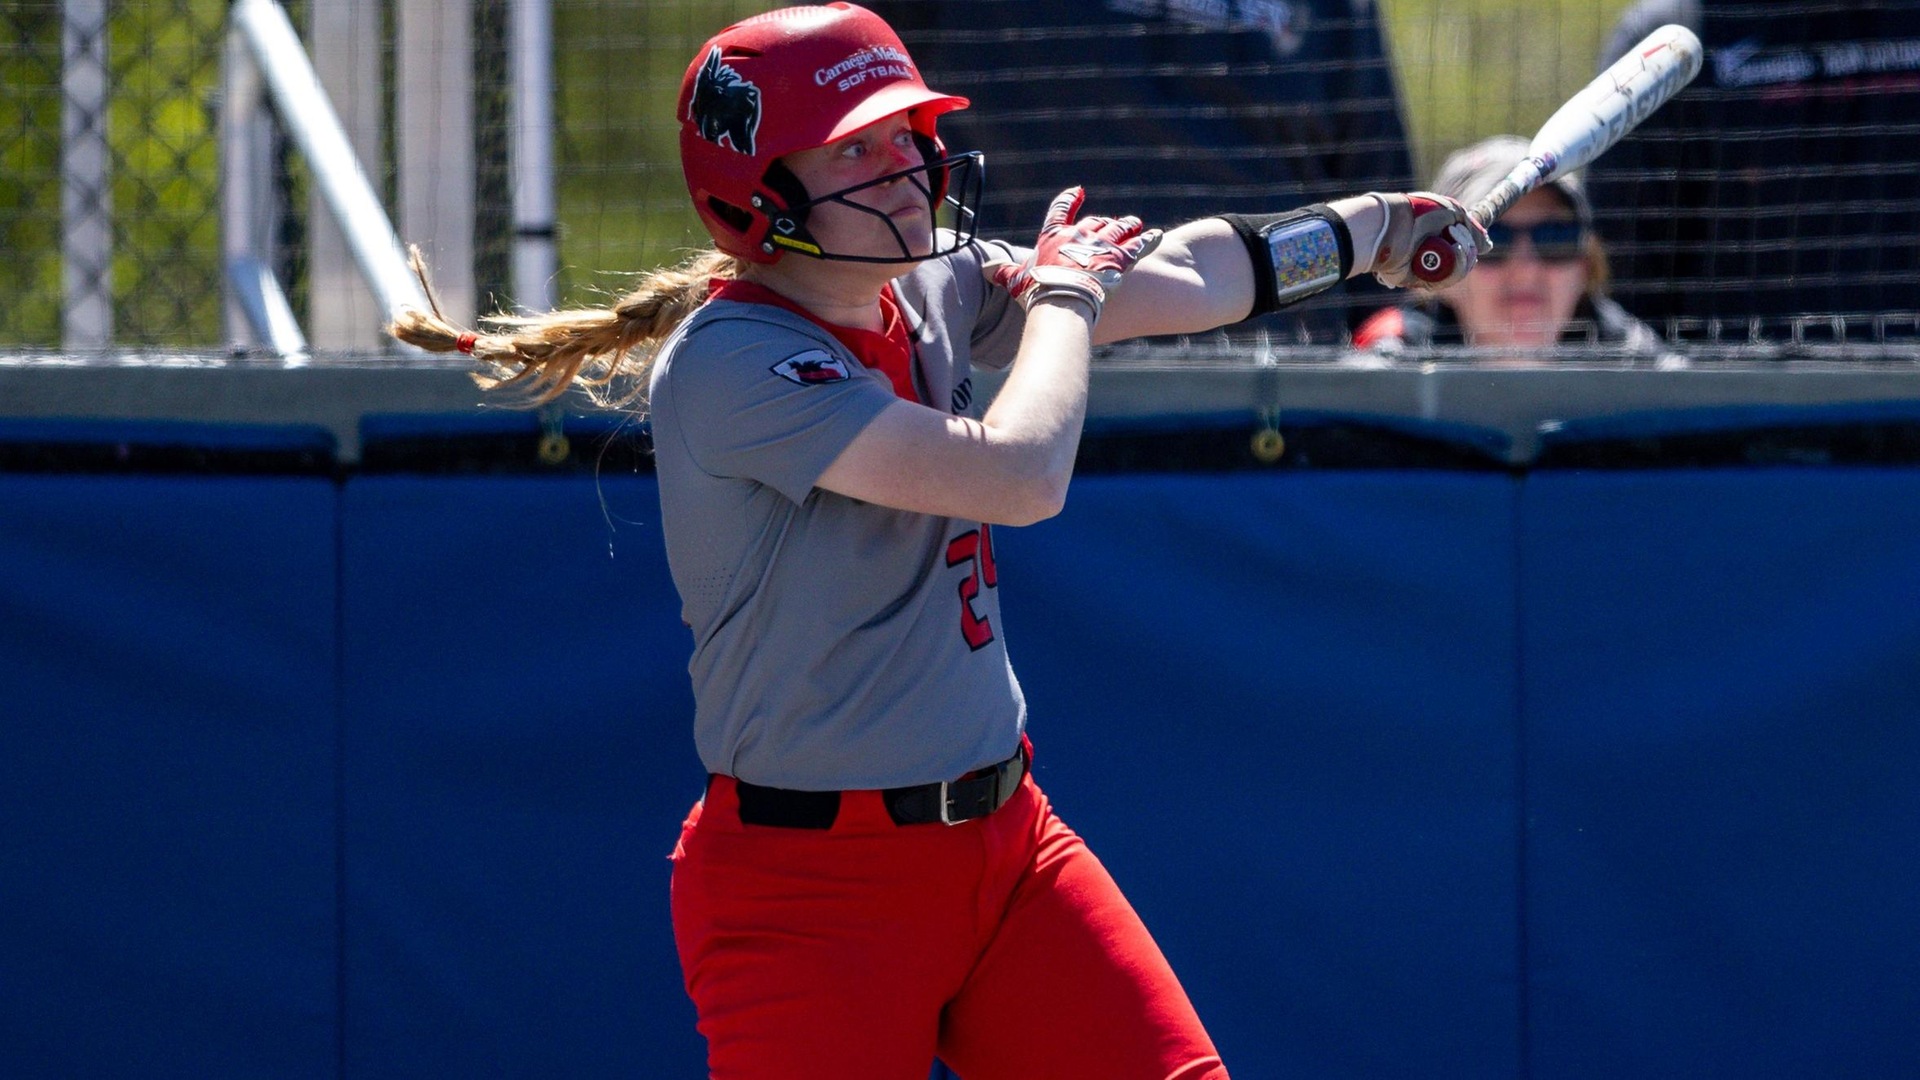 women's softball player wearing a gray jersey and a red helmet takes a swing